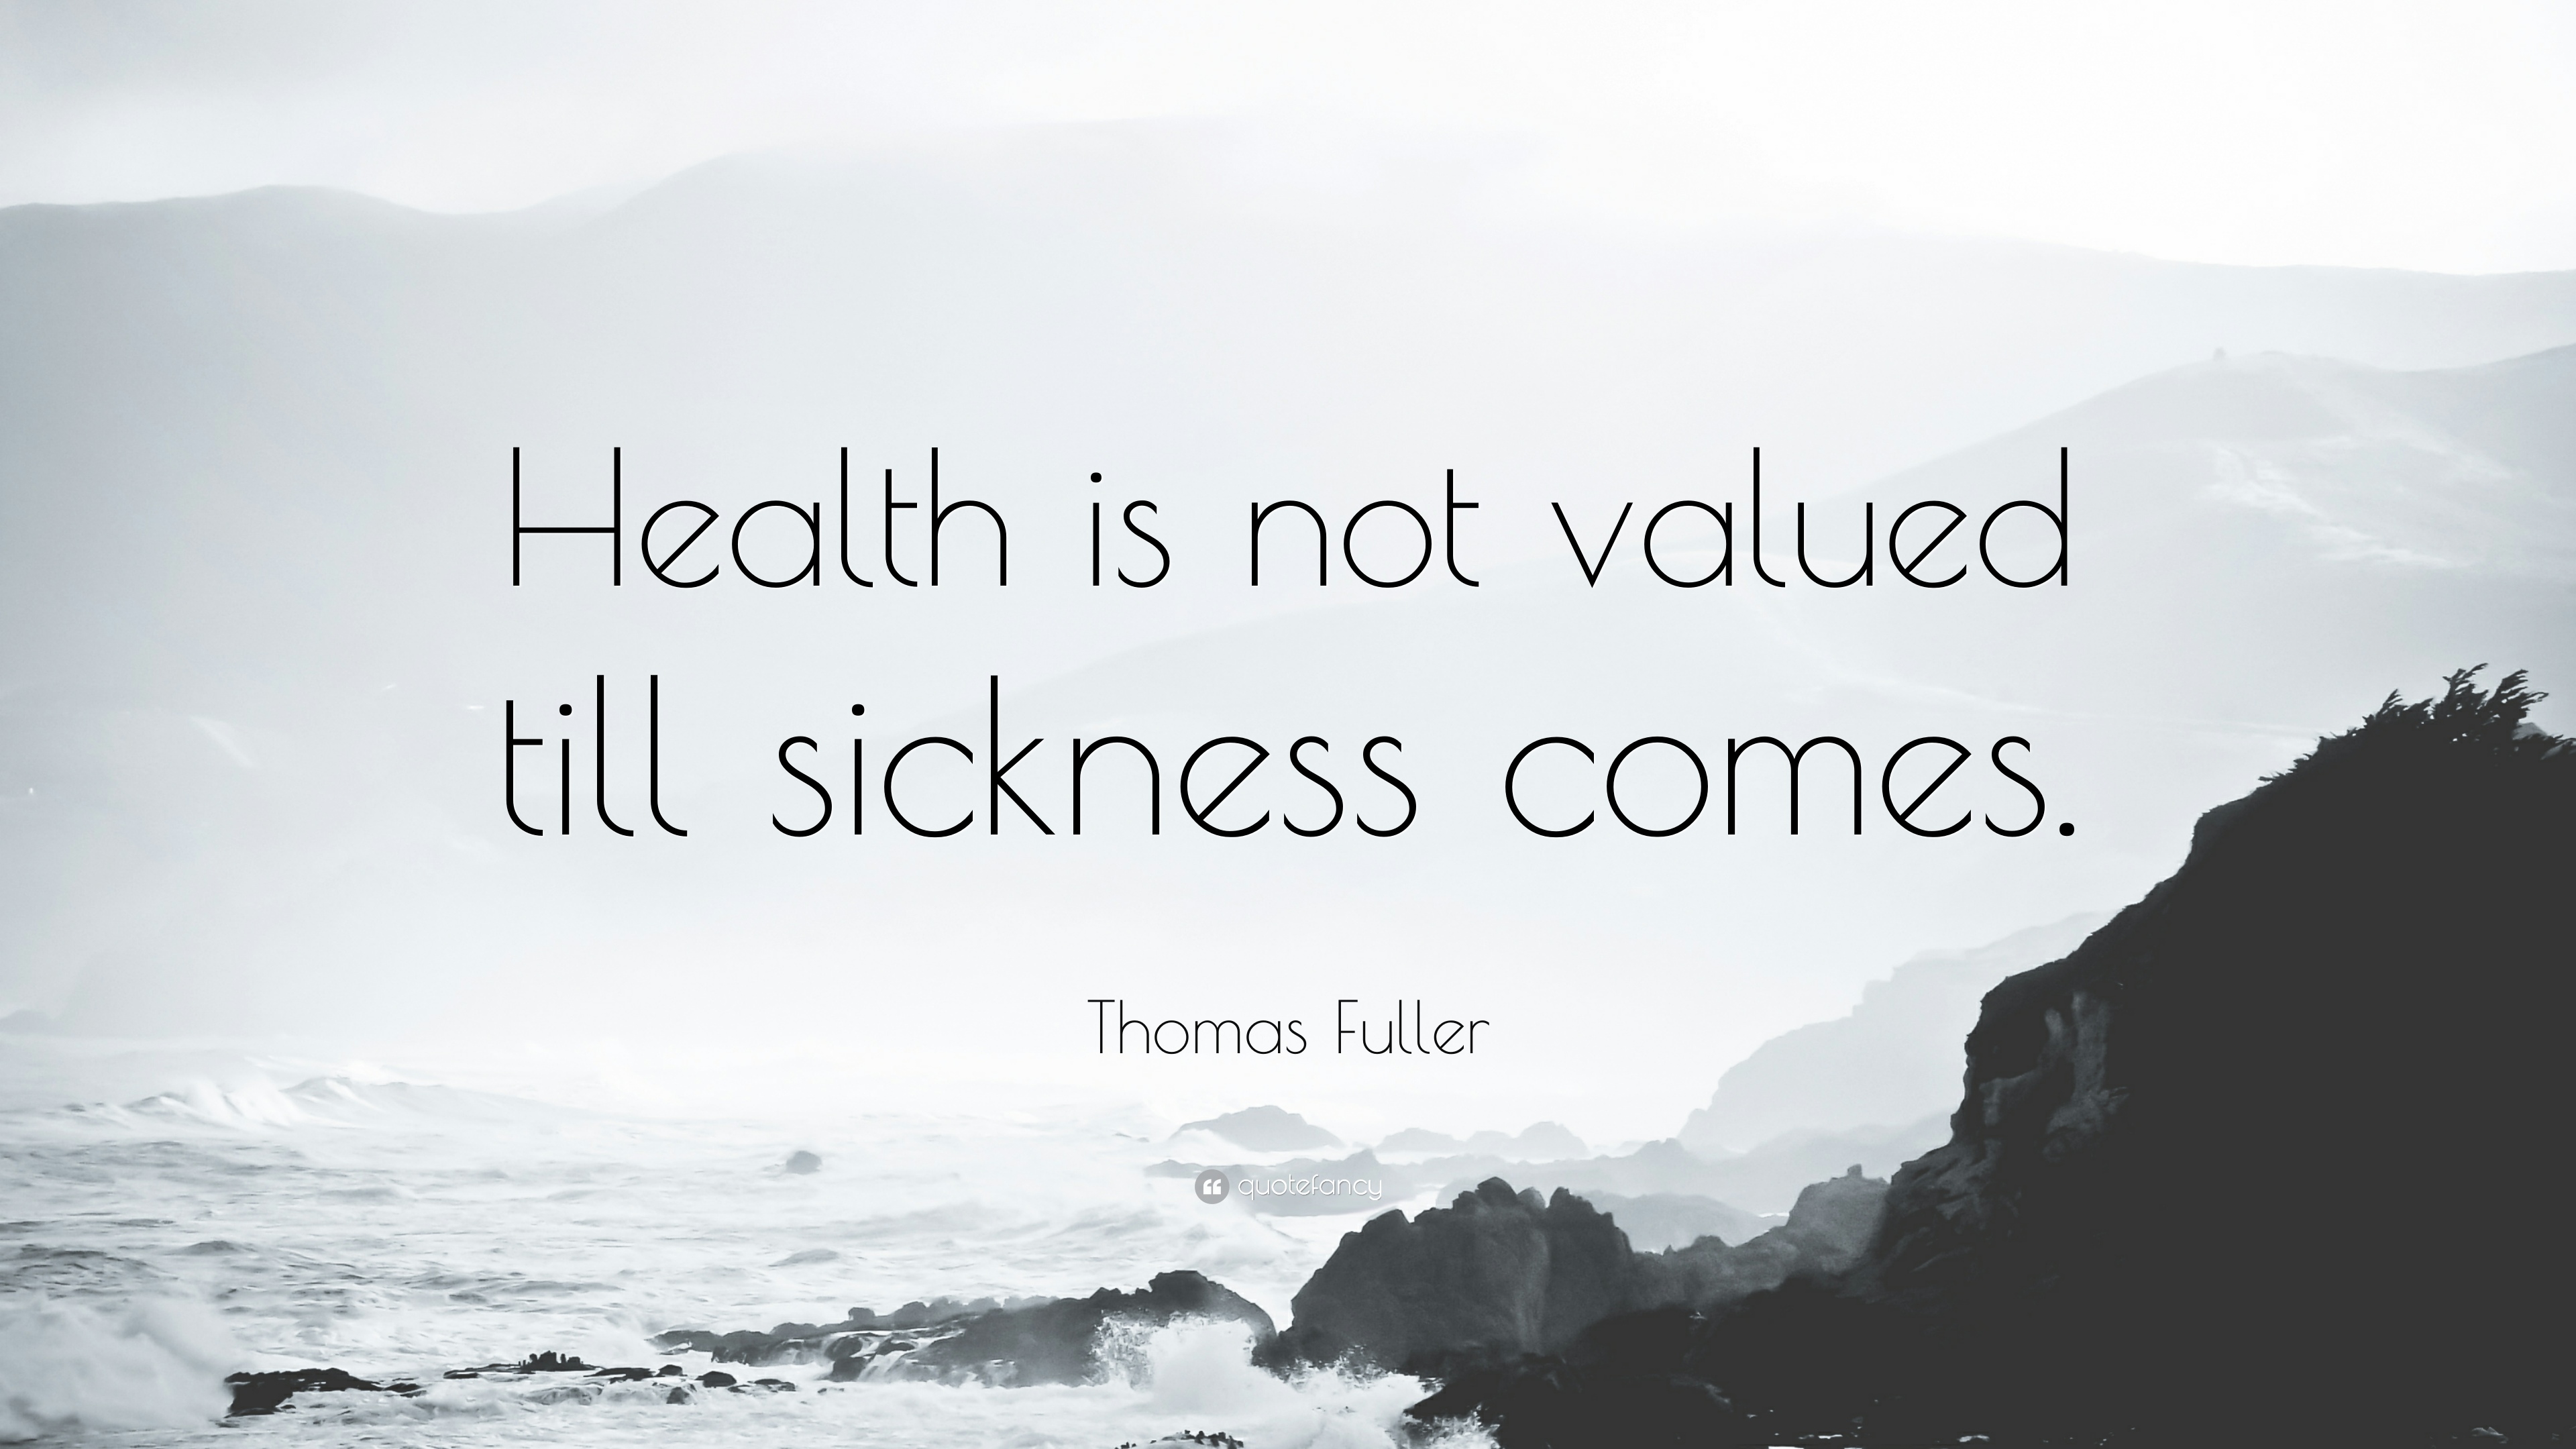 75 Most Beautiful Health Quotes And Sayings For Inspiration